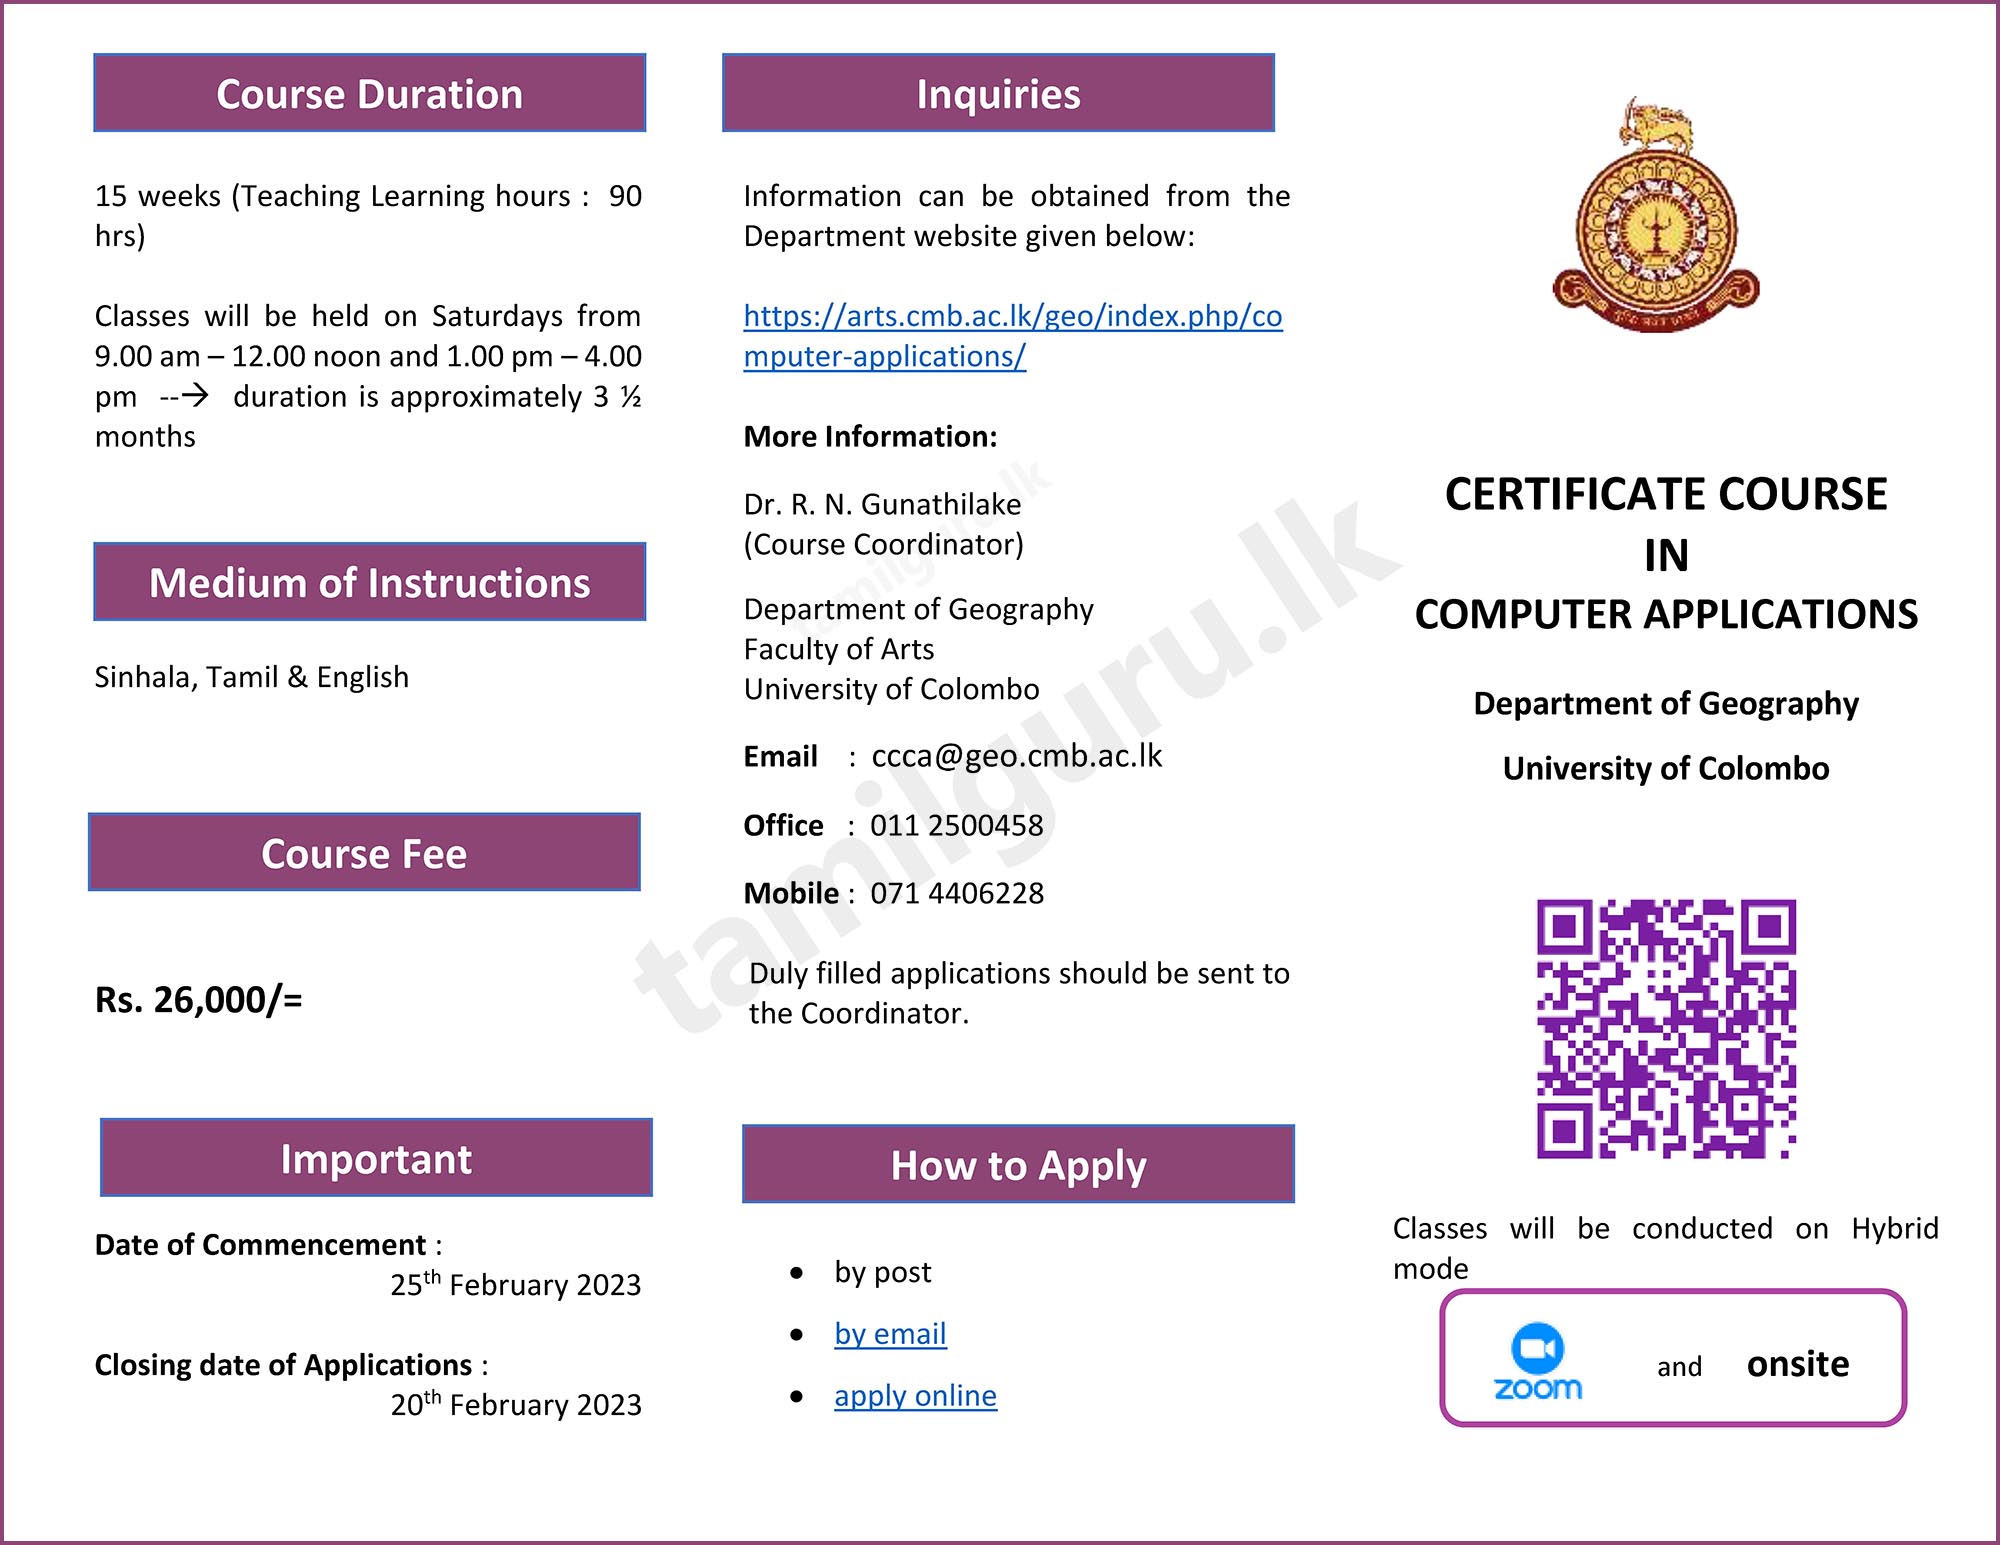 Certificate Course in Computer Applications (2023) - Department of Geography, University of Colombo